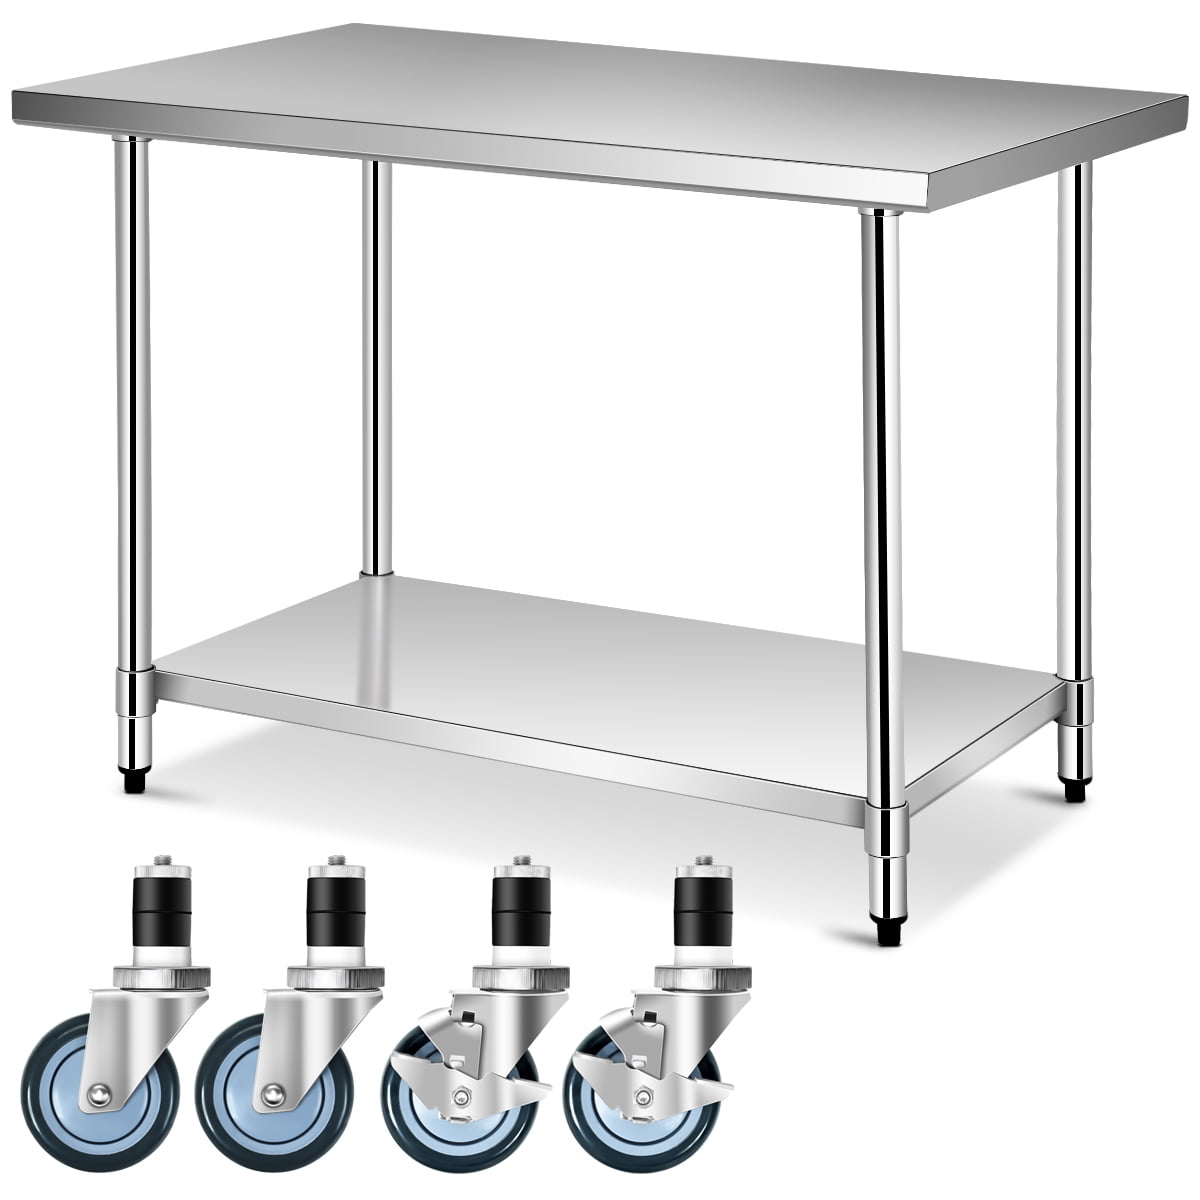 Stainless Steel Work Table 30" Wide Size 48" 